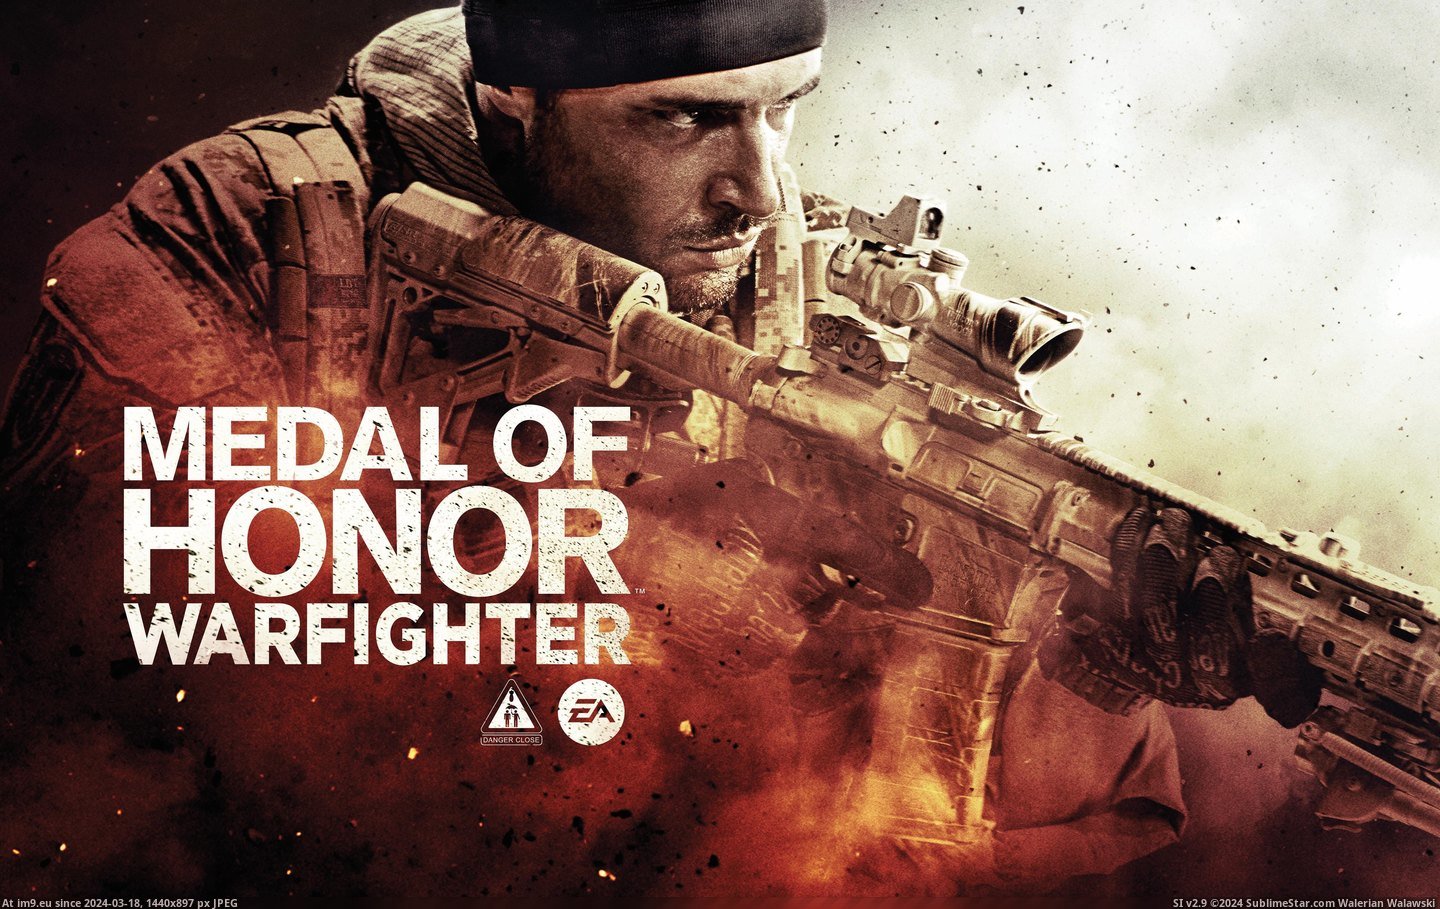 #Wallpaper #Wide #Warfighter #Honor #Medal Medal Of Honor Warfighter Wide HD Wallpaper Pic. (Obraz z album Unique HD Wallpapers))